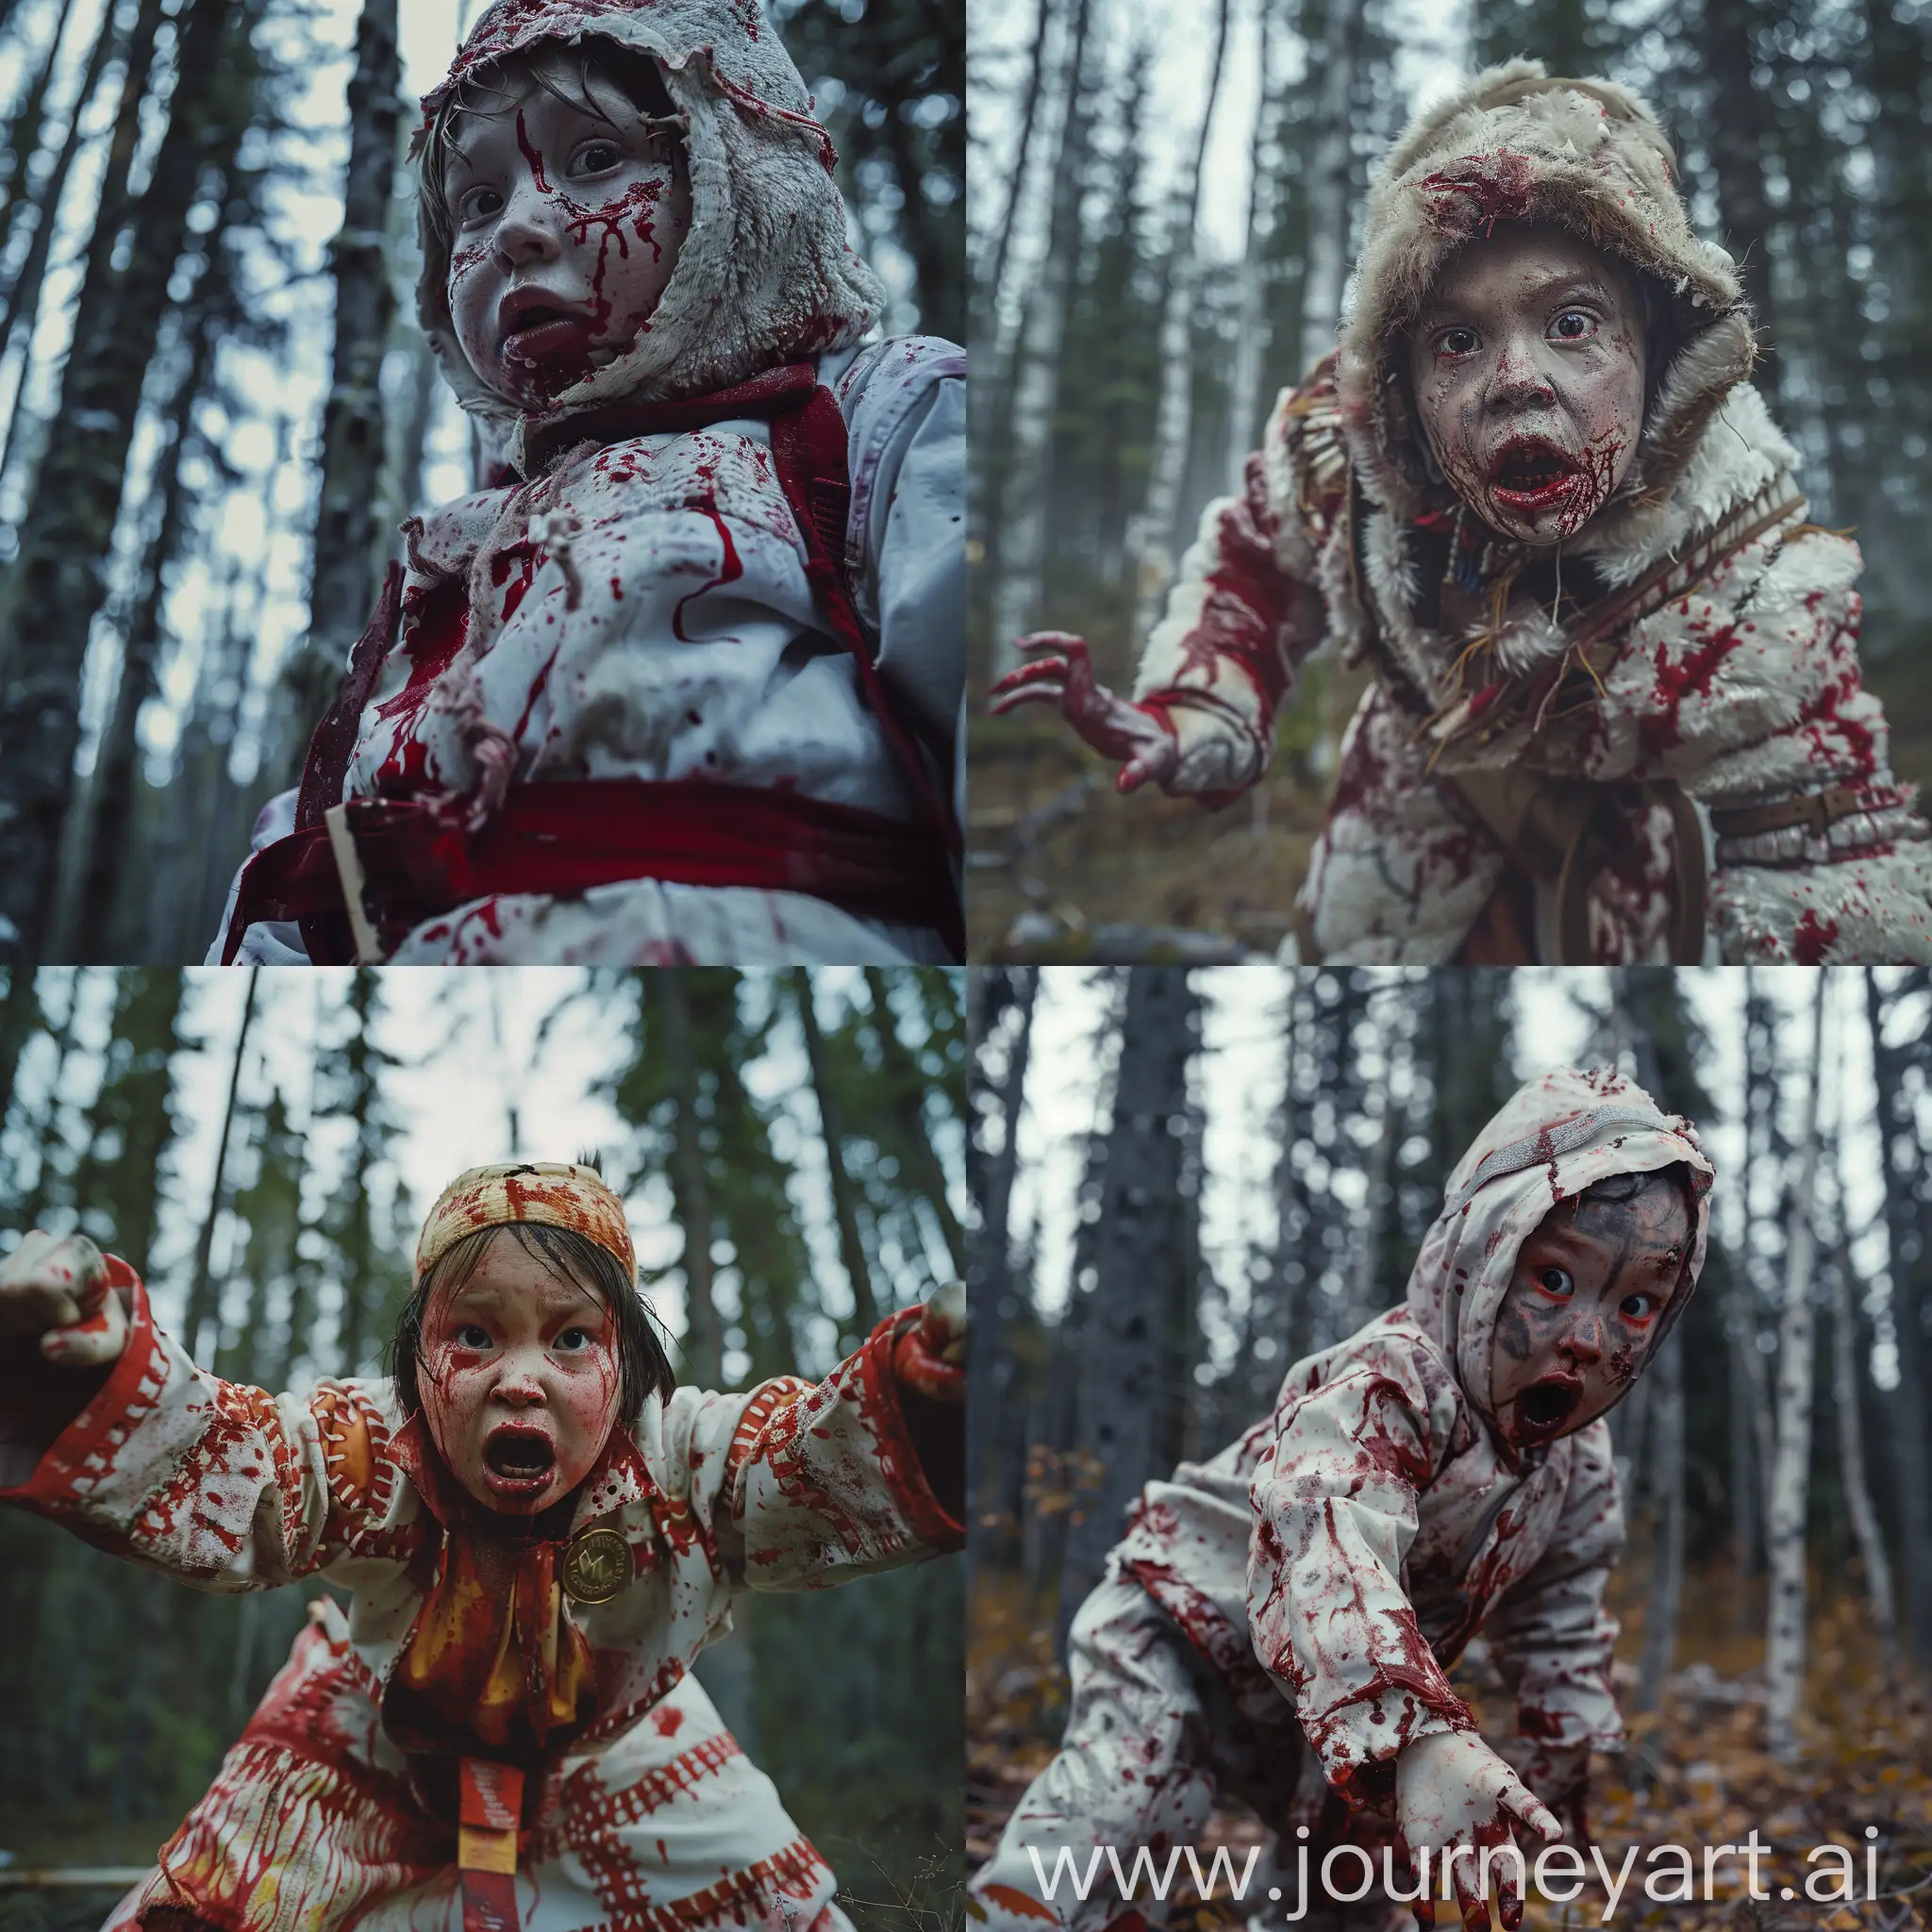 A long-shot cinematic film, still made with an Arri 435 camera and a 32mm Atlas anamorphic lens, based on the frightening deformed child wearing blood-stained Eskimo clothes, ready to fight looking at the camera. in the woods in Alaska. Bright color scheme, scary, horror